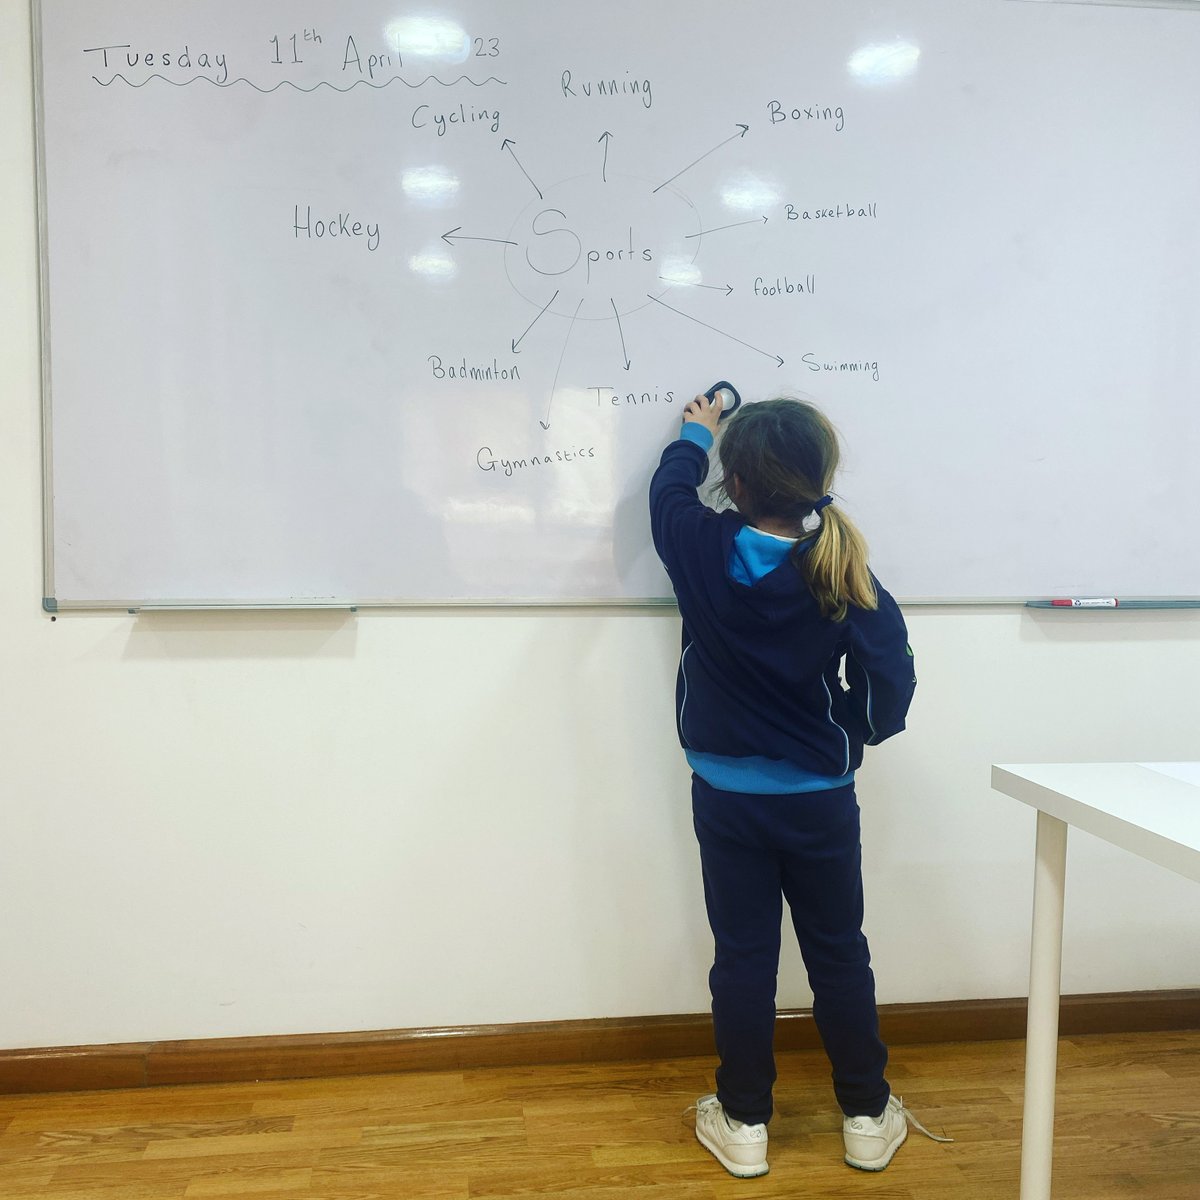 Great to be back after the Easter Holidays! 🐣🥚⛪️
#clasesdeingles #academiadeingles #vita #leon #leonesp